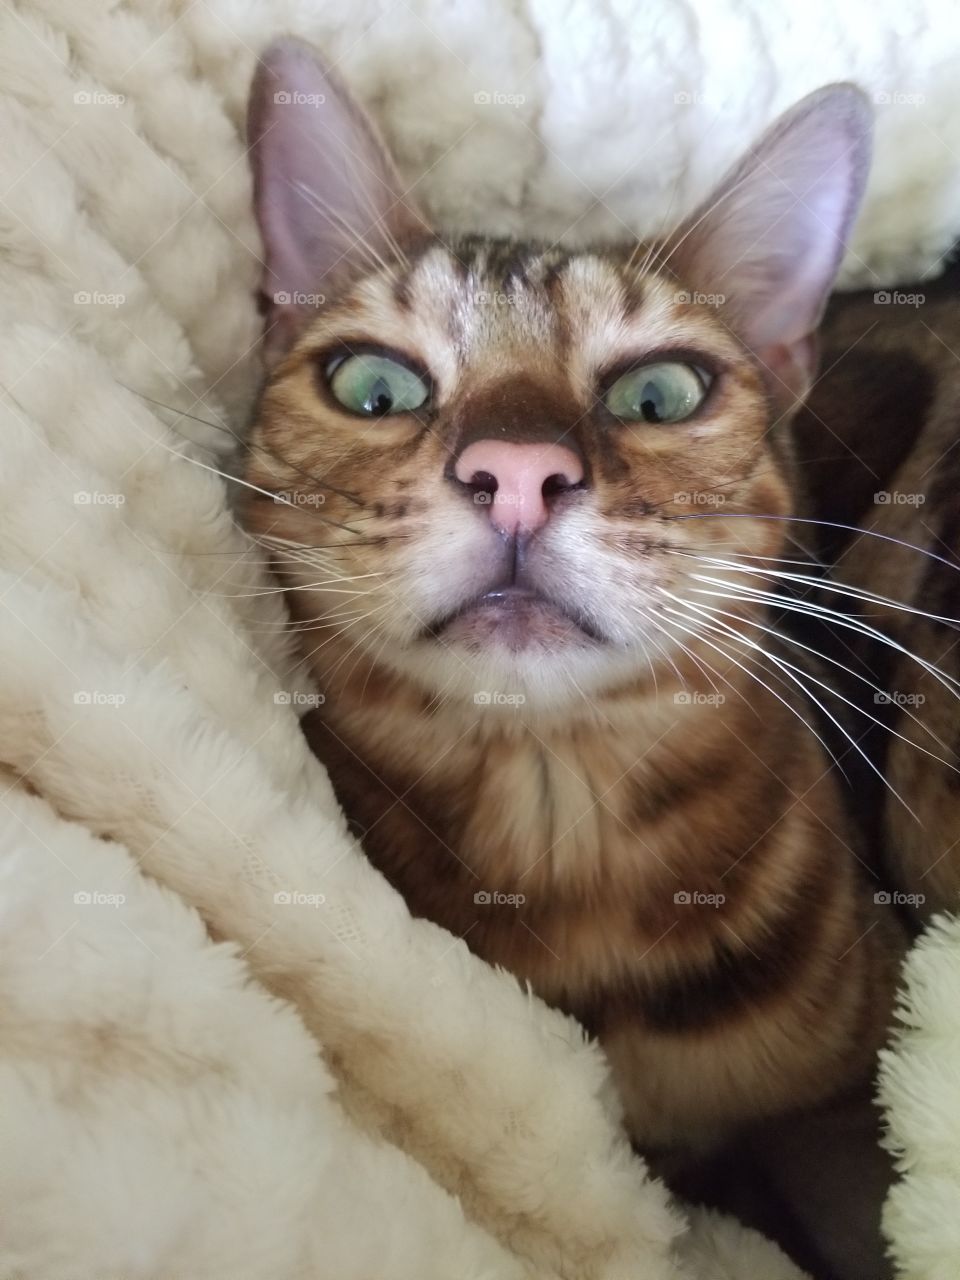 Bengal cat wakes up from a nap inside a fuzzy soft blanket